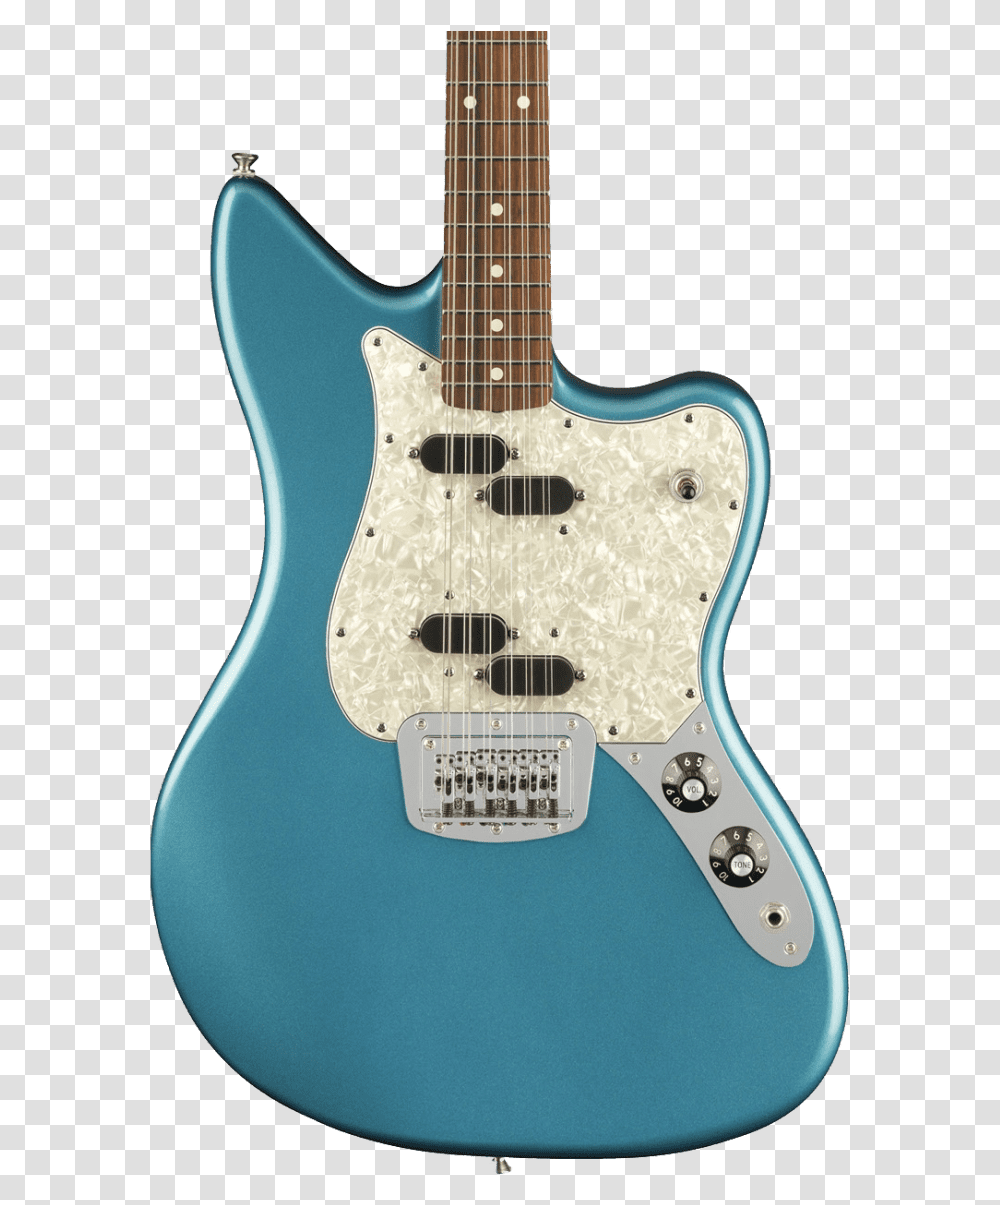 Fender Electric Xii Pf Lpb, Guitar, Leisure Activities, Musical Instrument, Electric Guitar Transparent Png